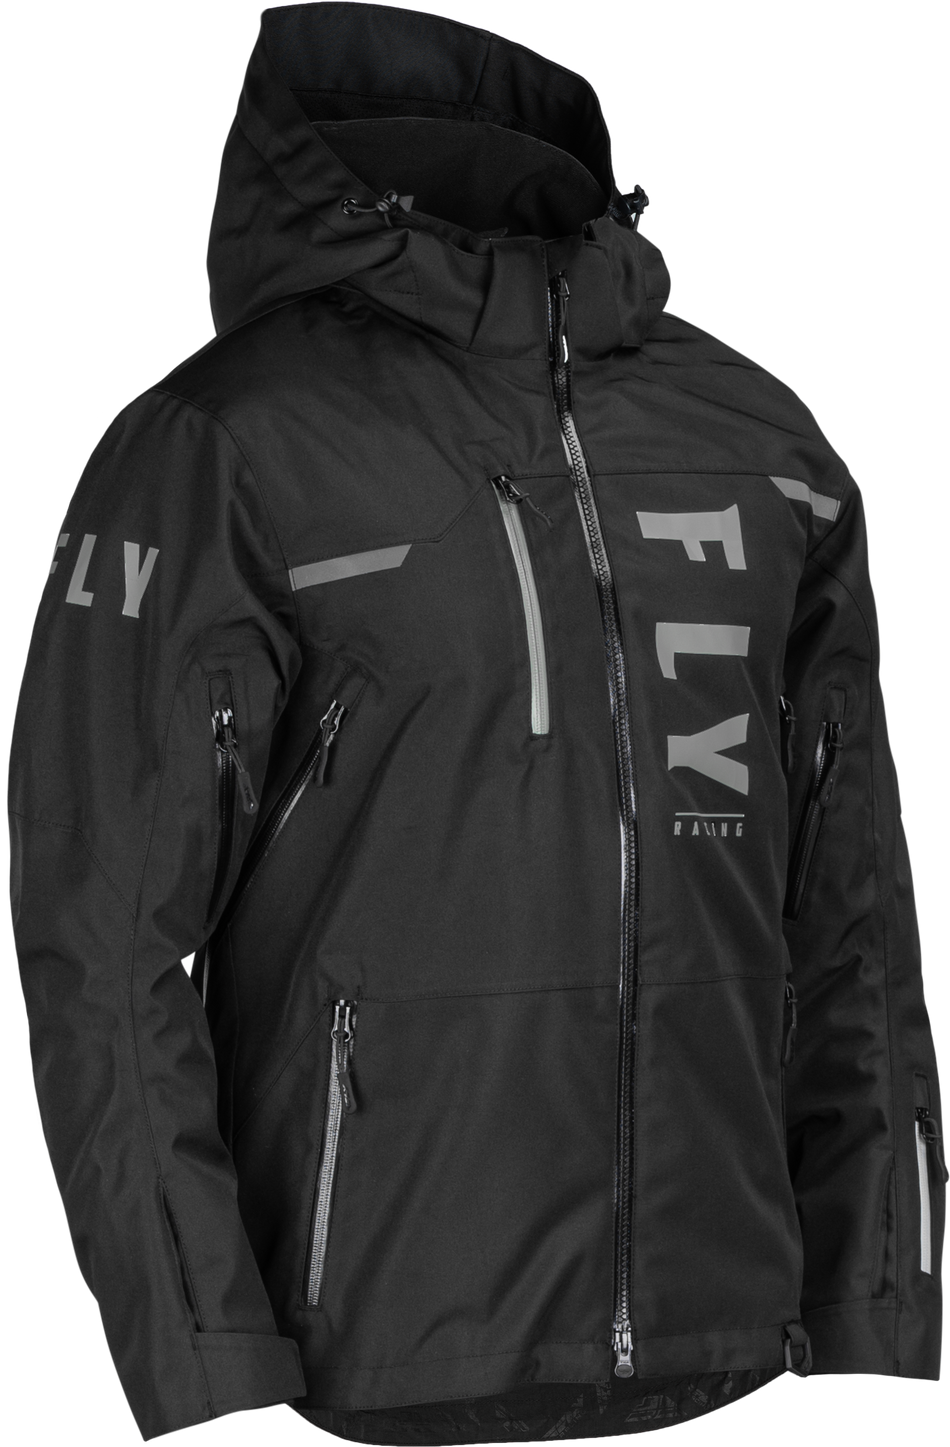 FLY RACING Carbon Jacket Black Sm 470-5200S